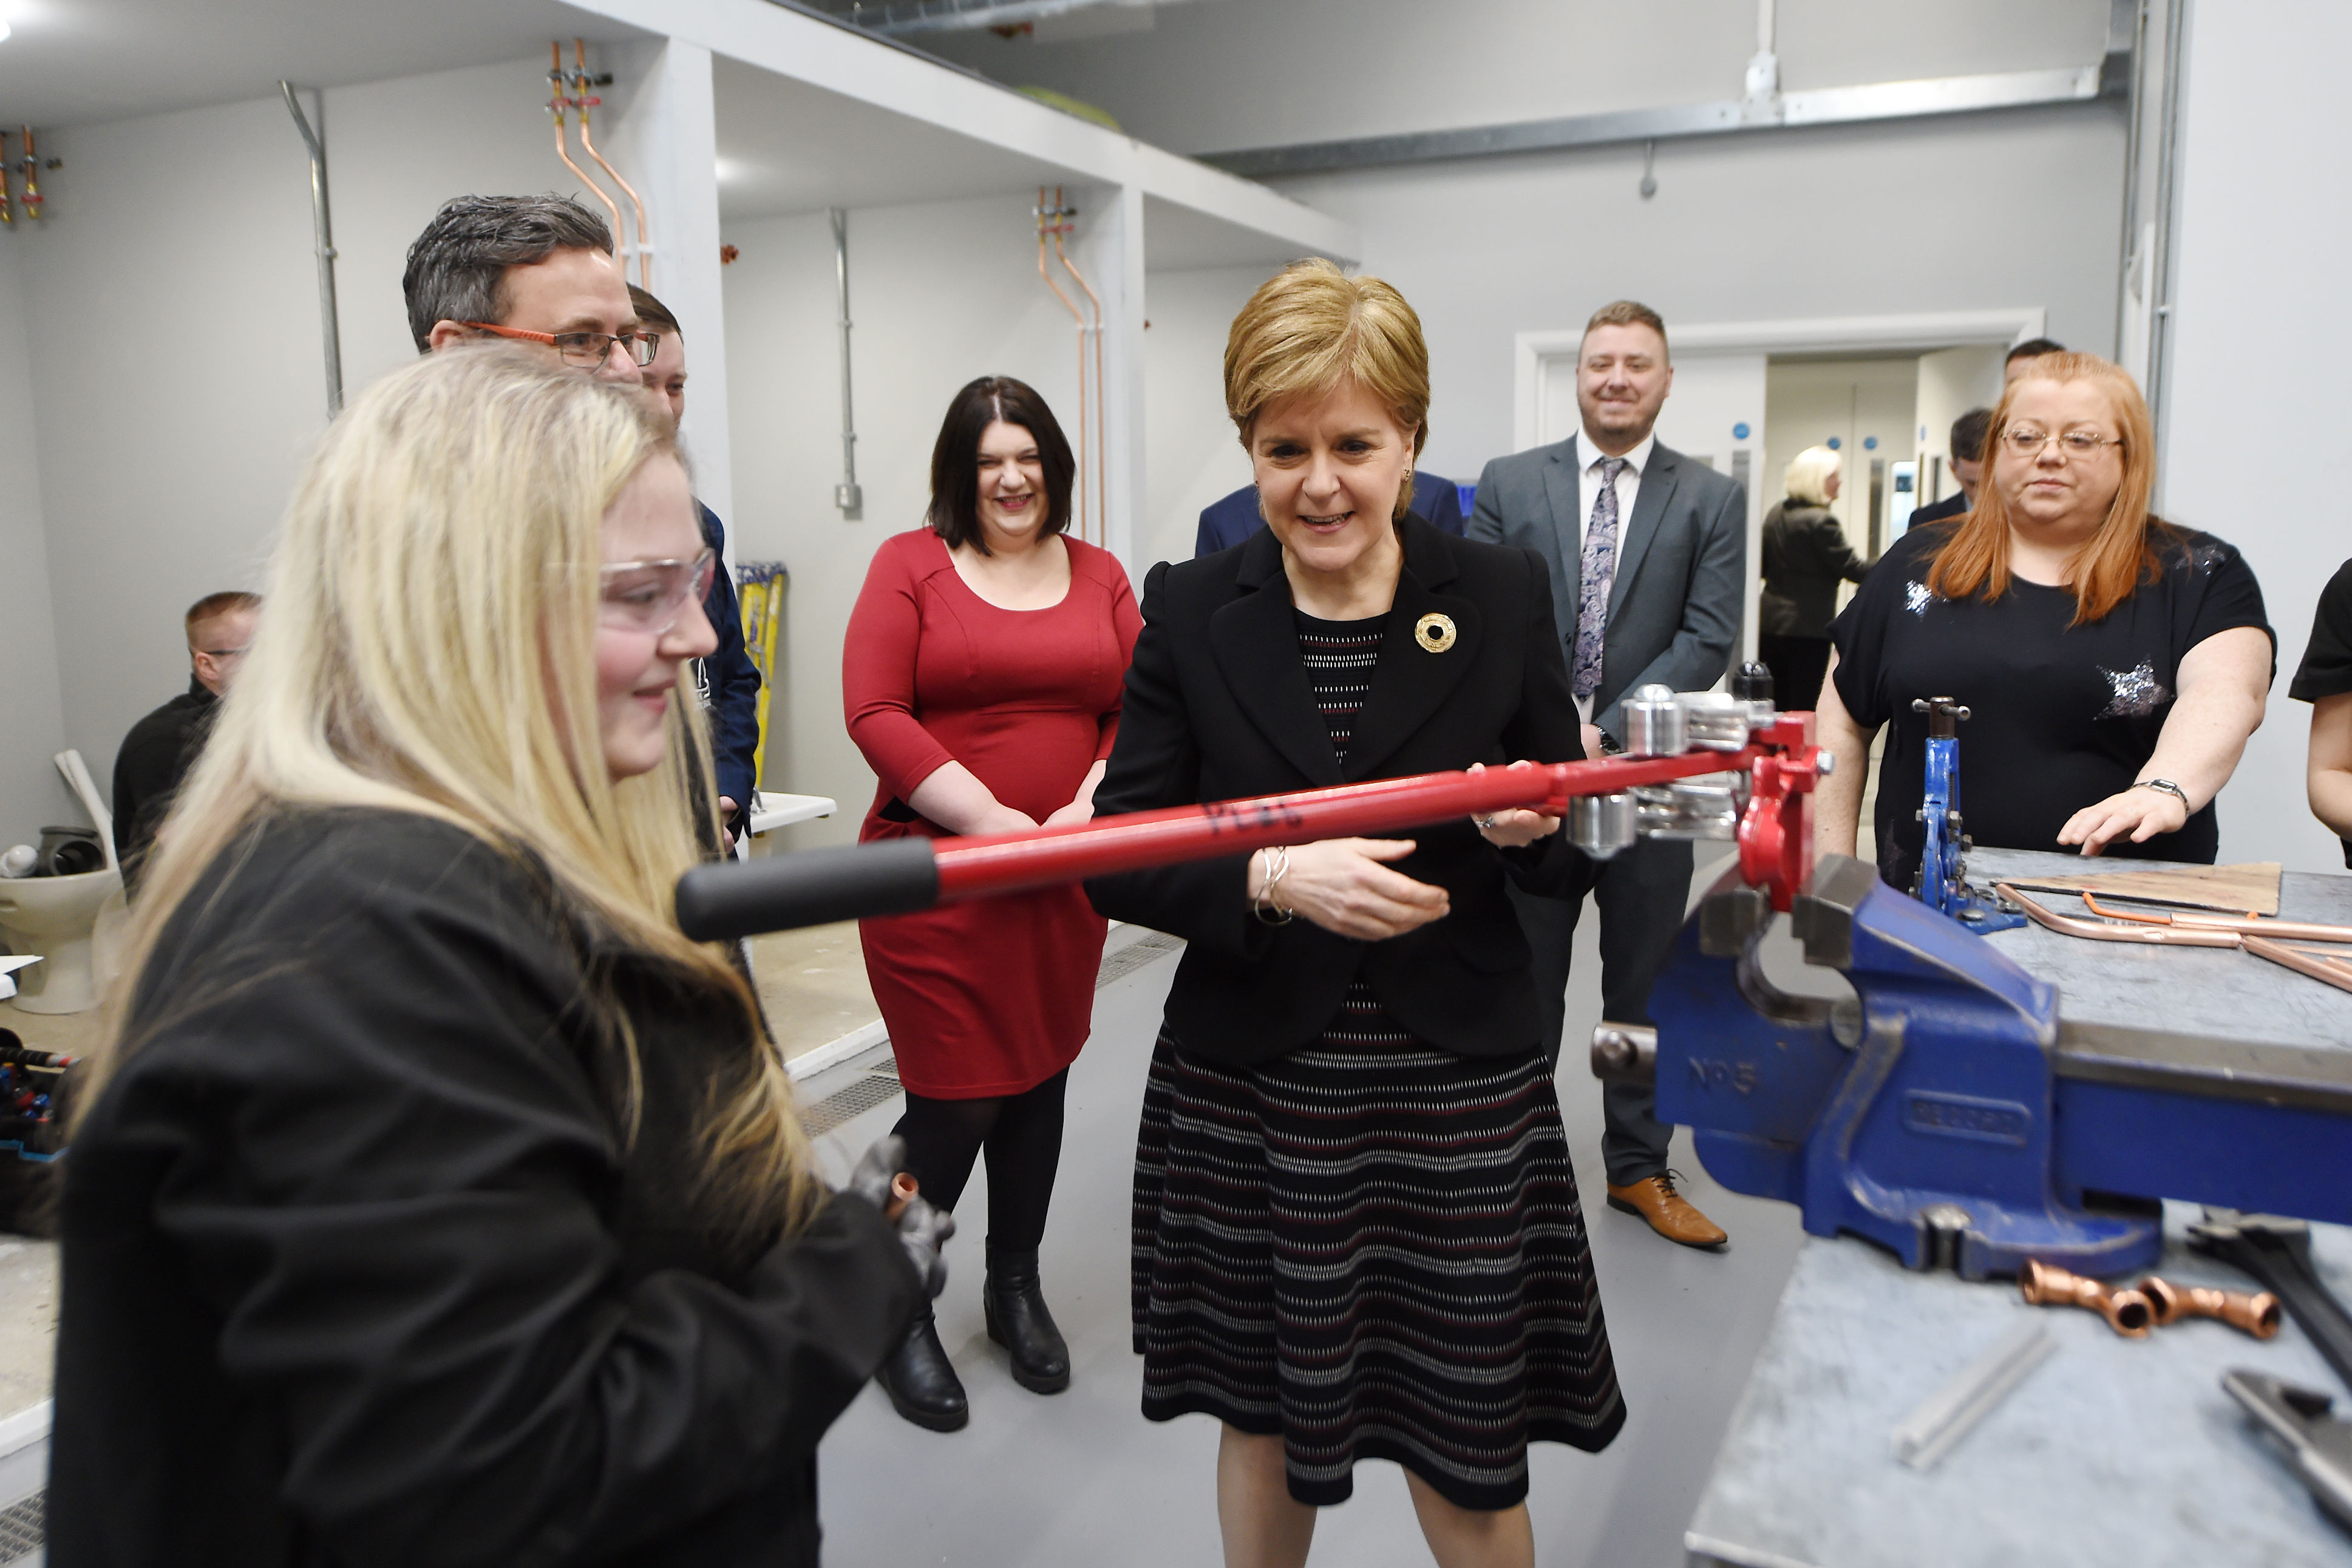 First Minister opens City Building college